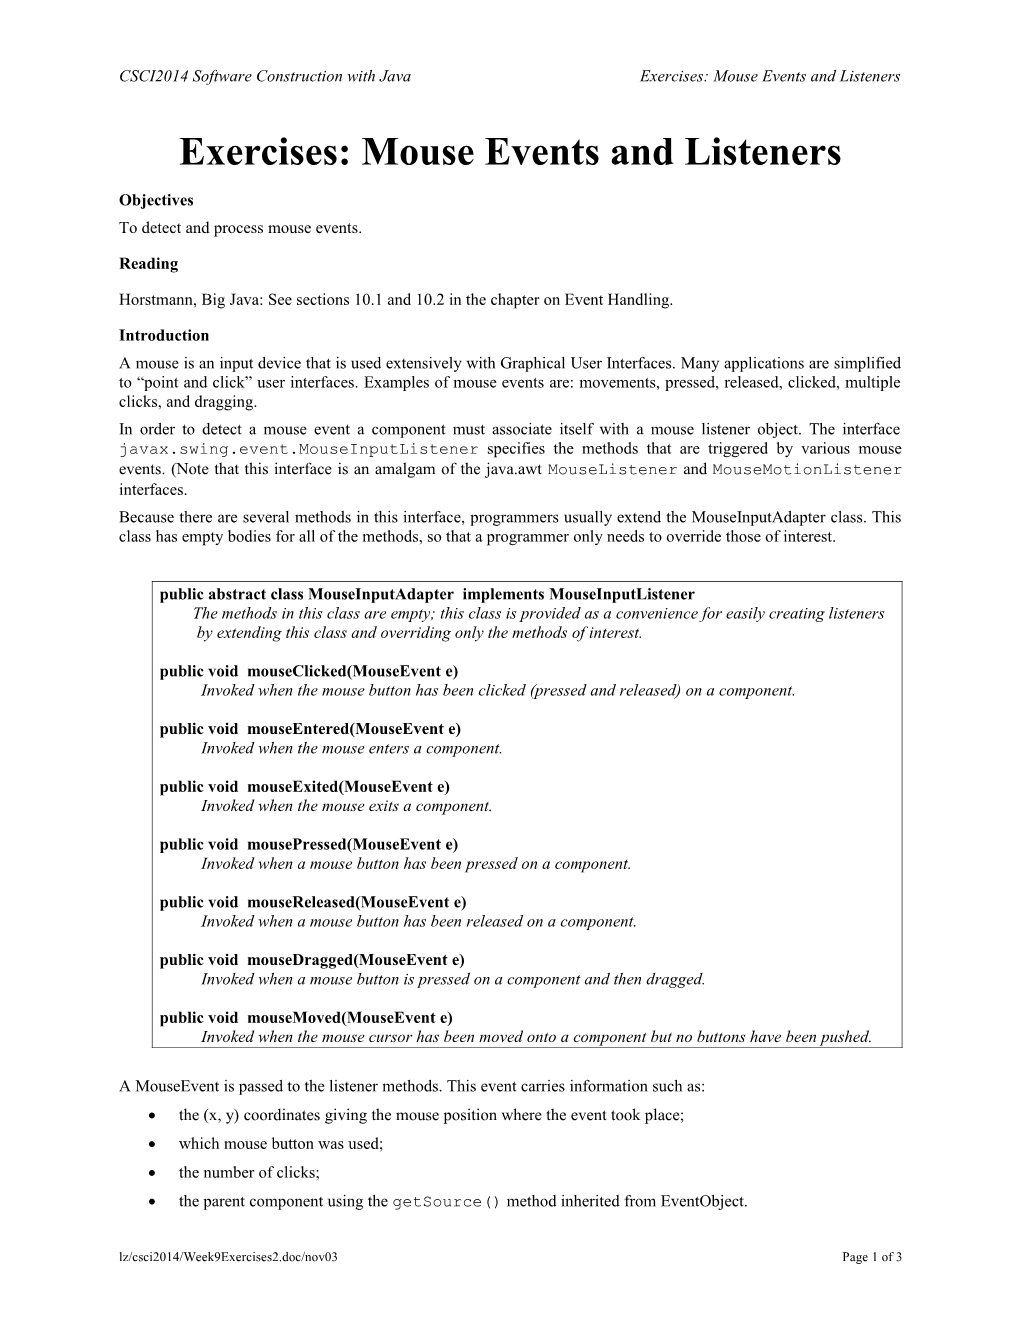 CSCI2014 Exercises:Mouse Events and Listeners